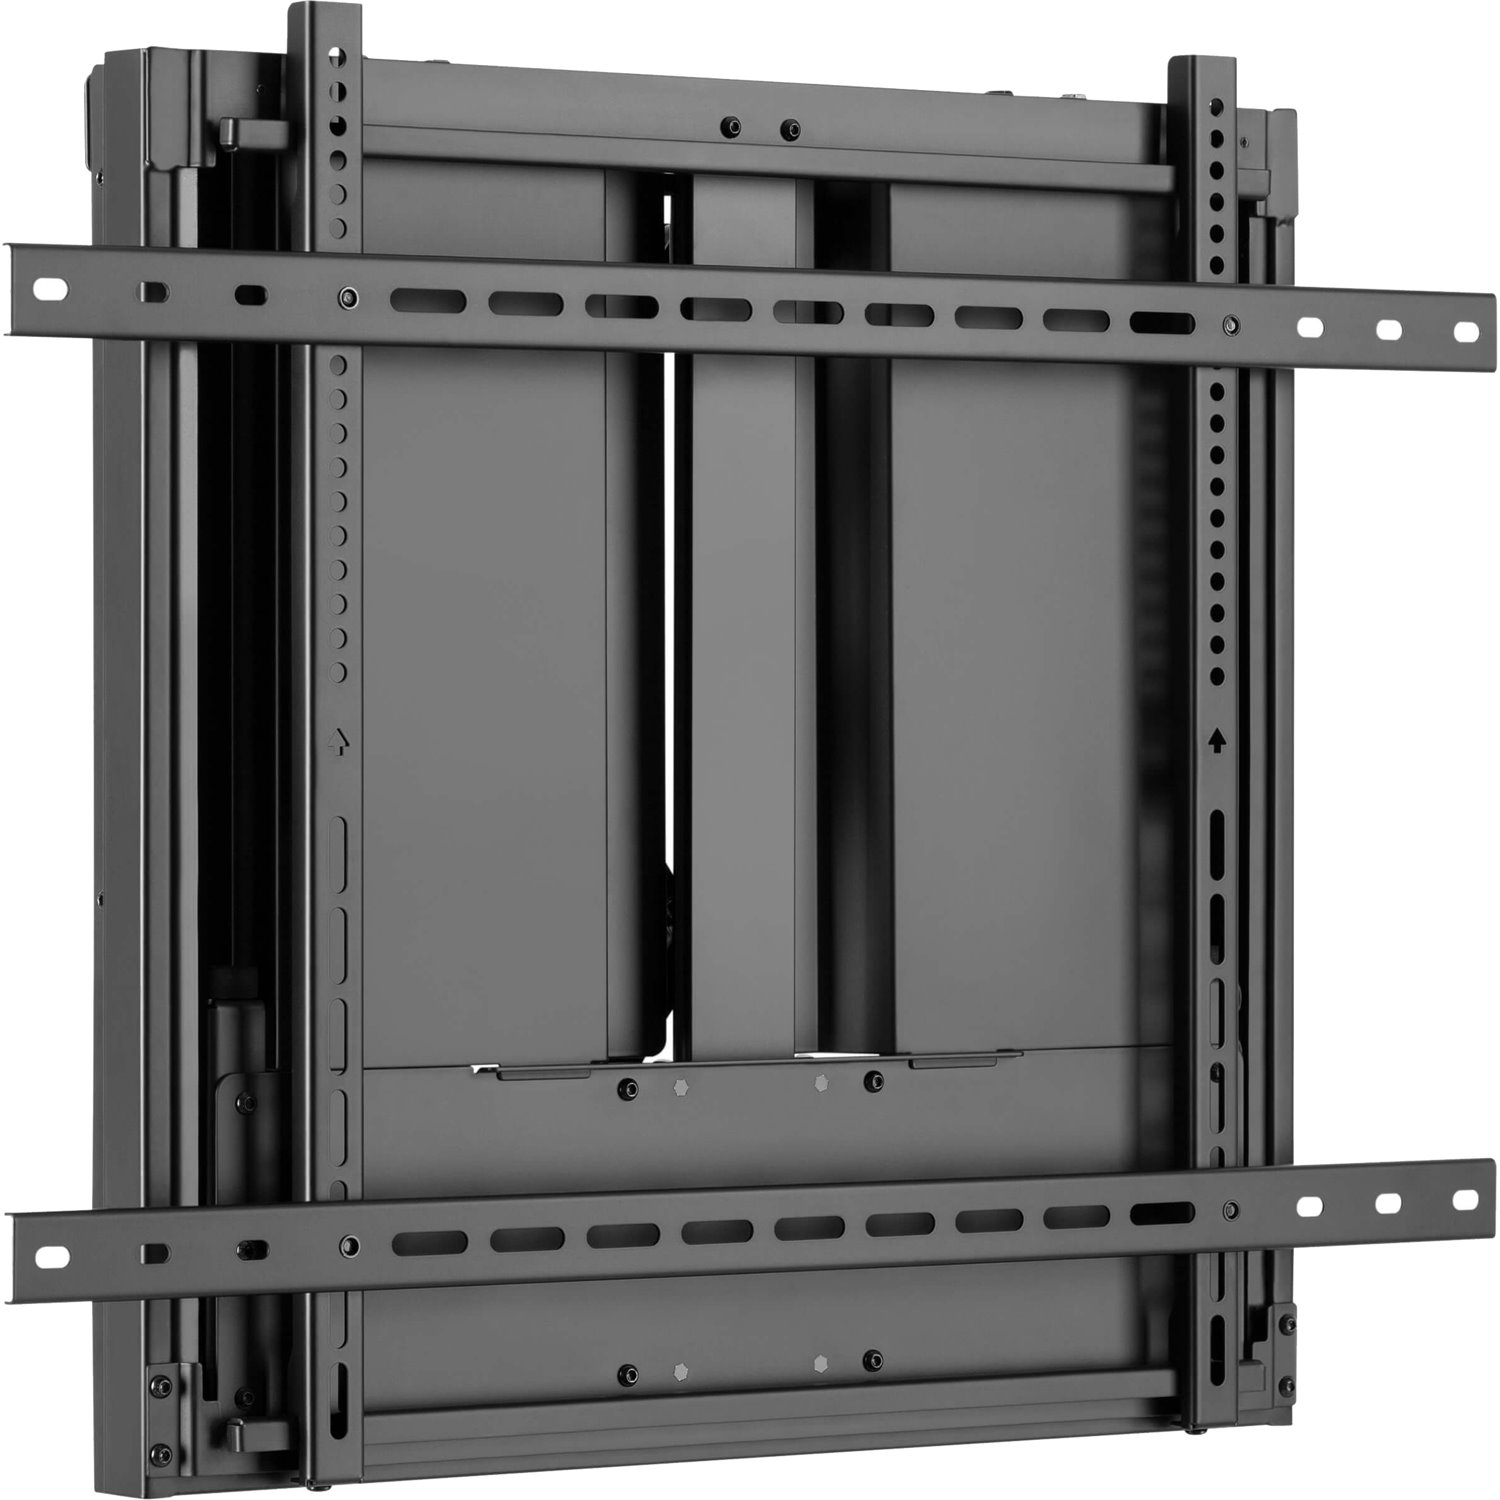 Tripp Lite by Eaton Height-Adjustable TV Wall Mount for 70" to 90" Flat-Panel Interactive Displays